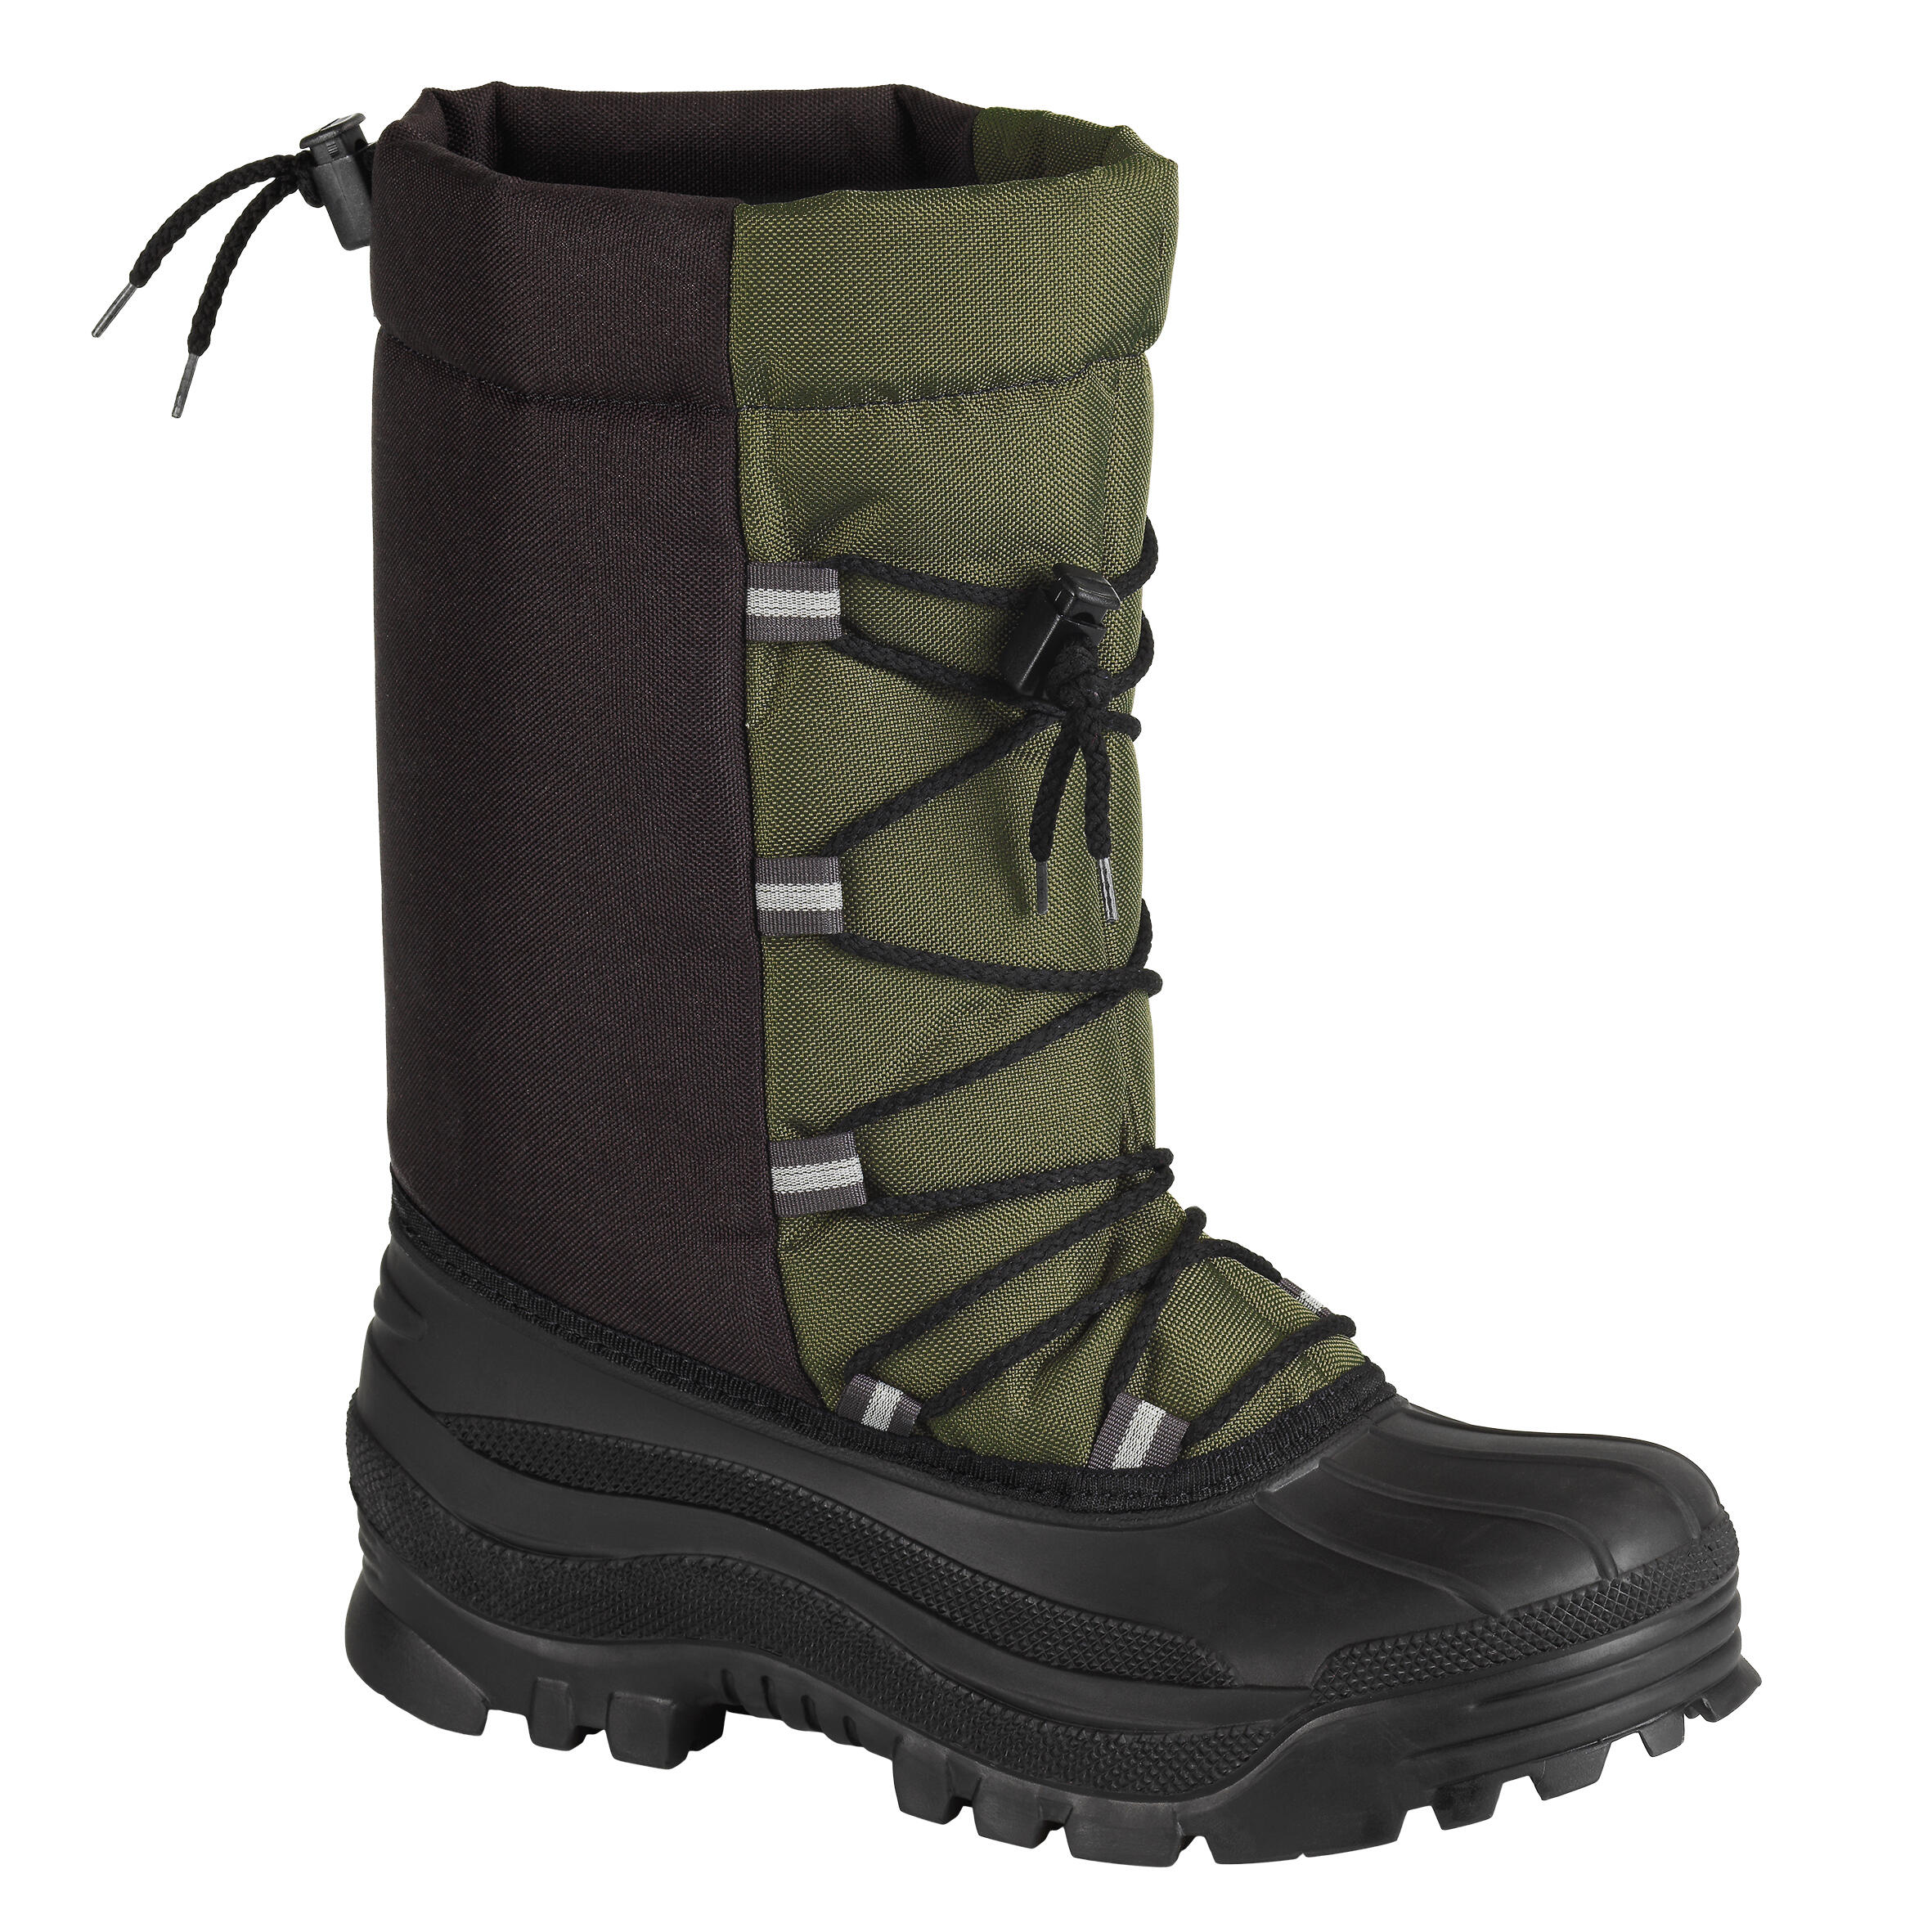 Warm Outdoor Boots - Green 1/6